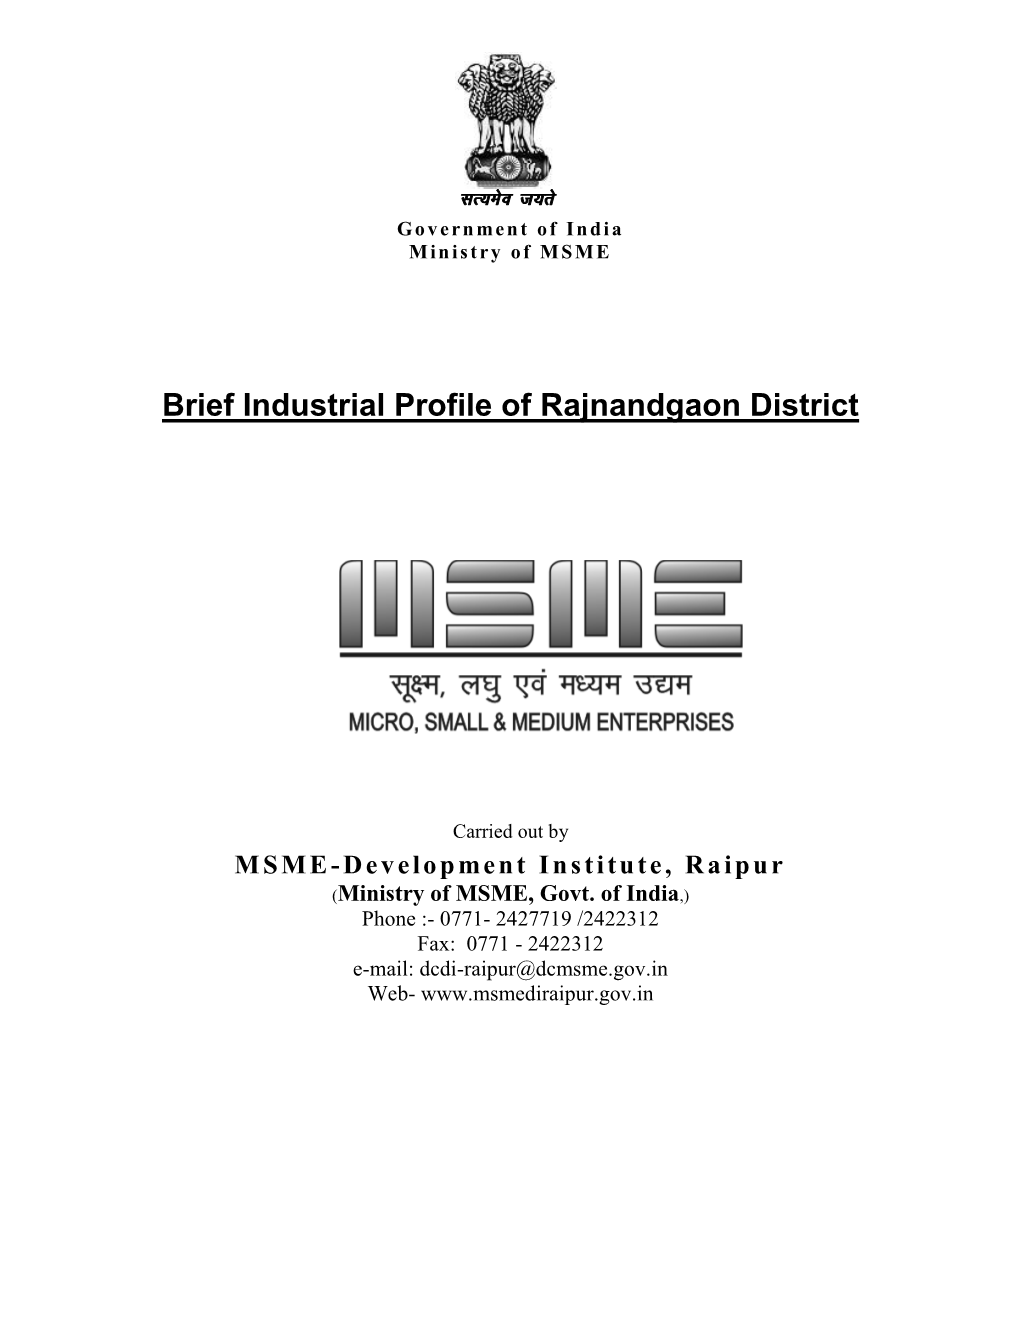 Brief Industrial Profile of Rajnandgaon District